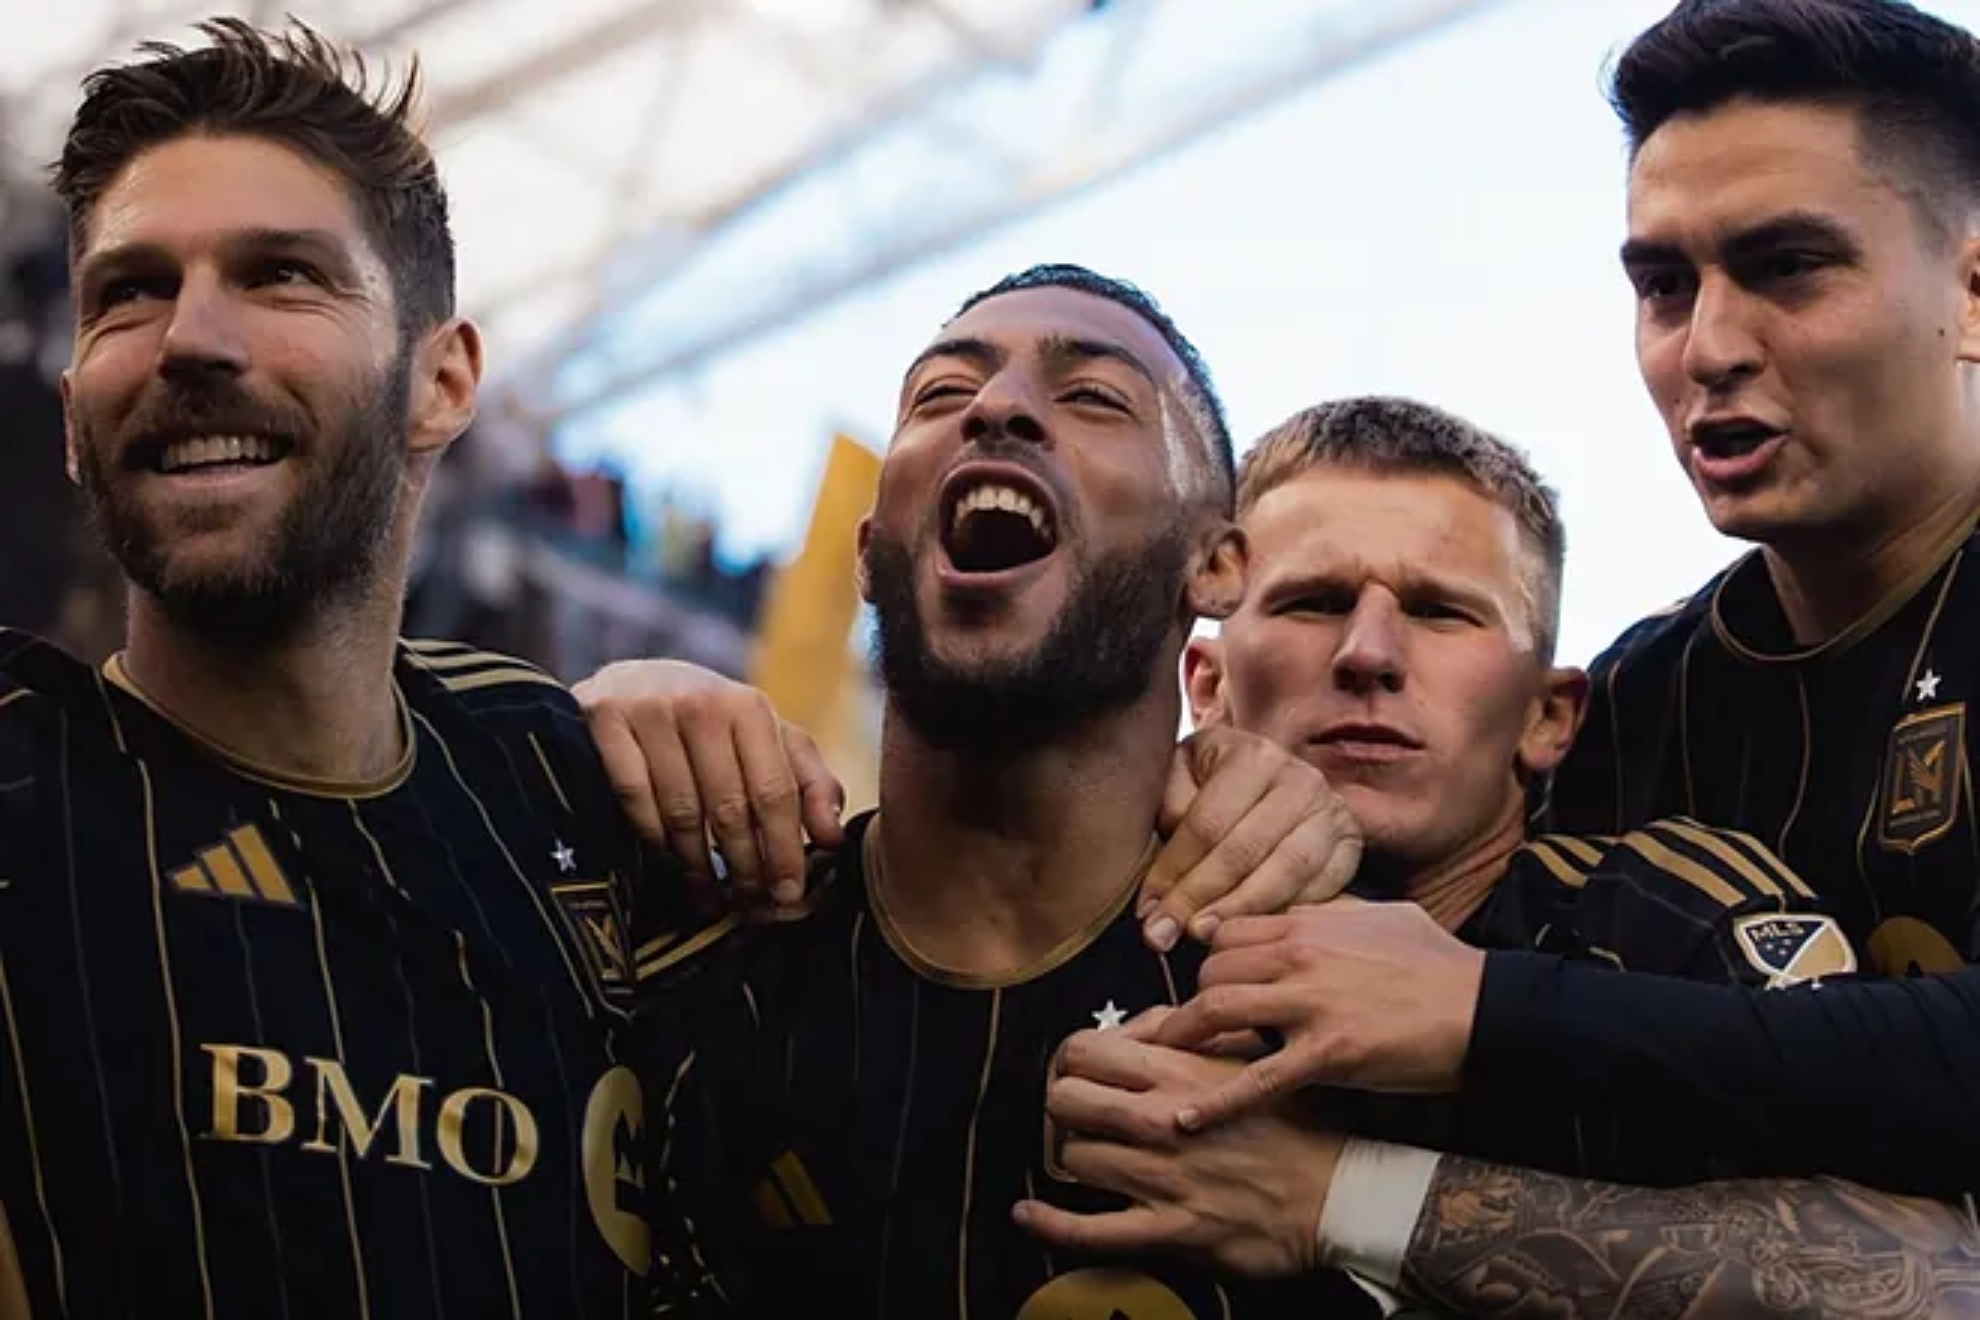 LAFC rises to victory at home against LA Galaxy in El Trfico derby